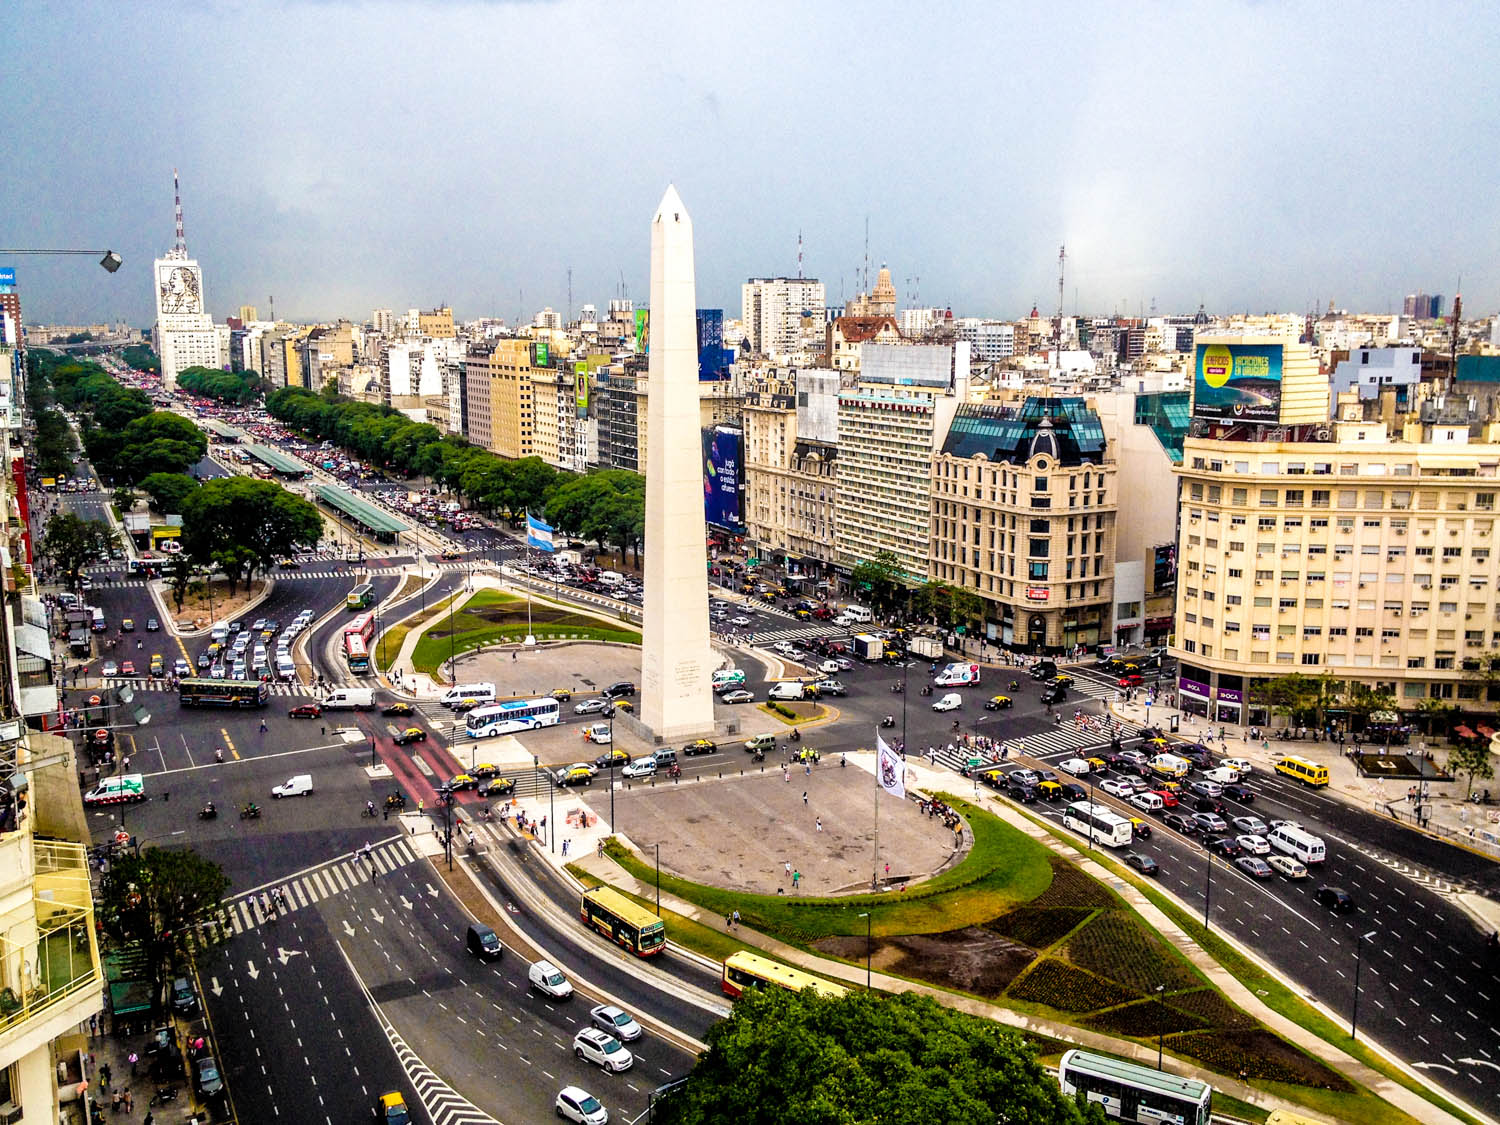 Amazing Buenos Aires Pictures & Backgrounds